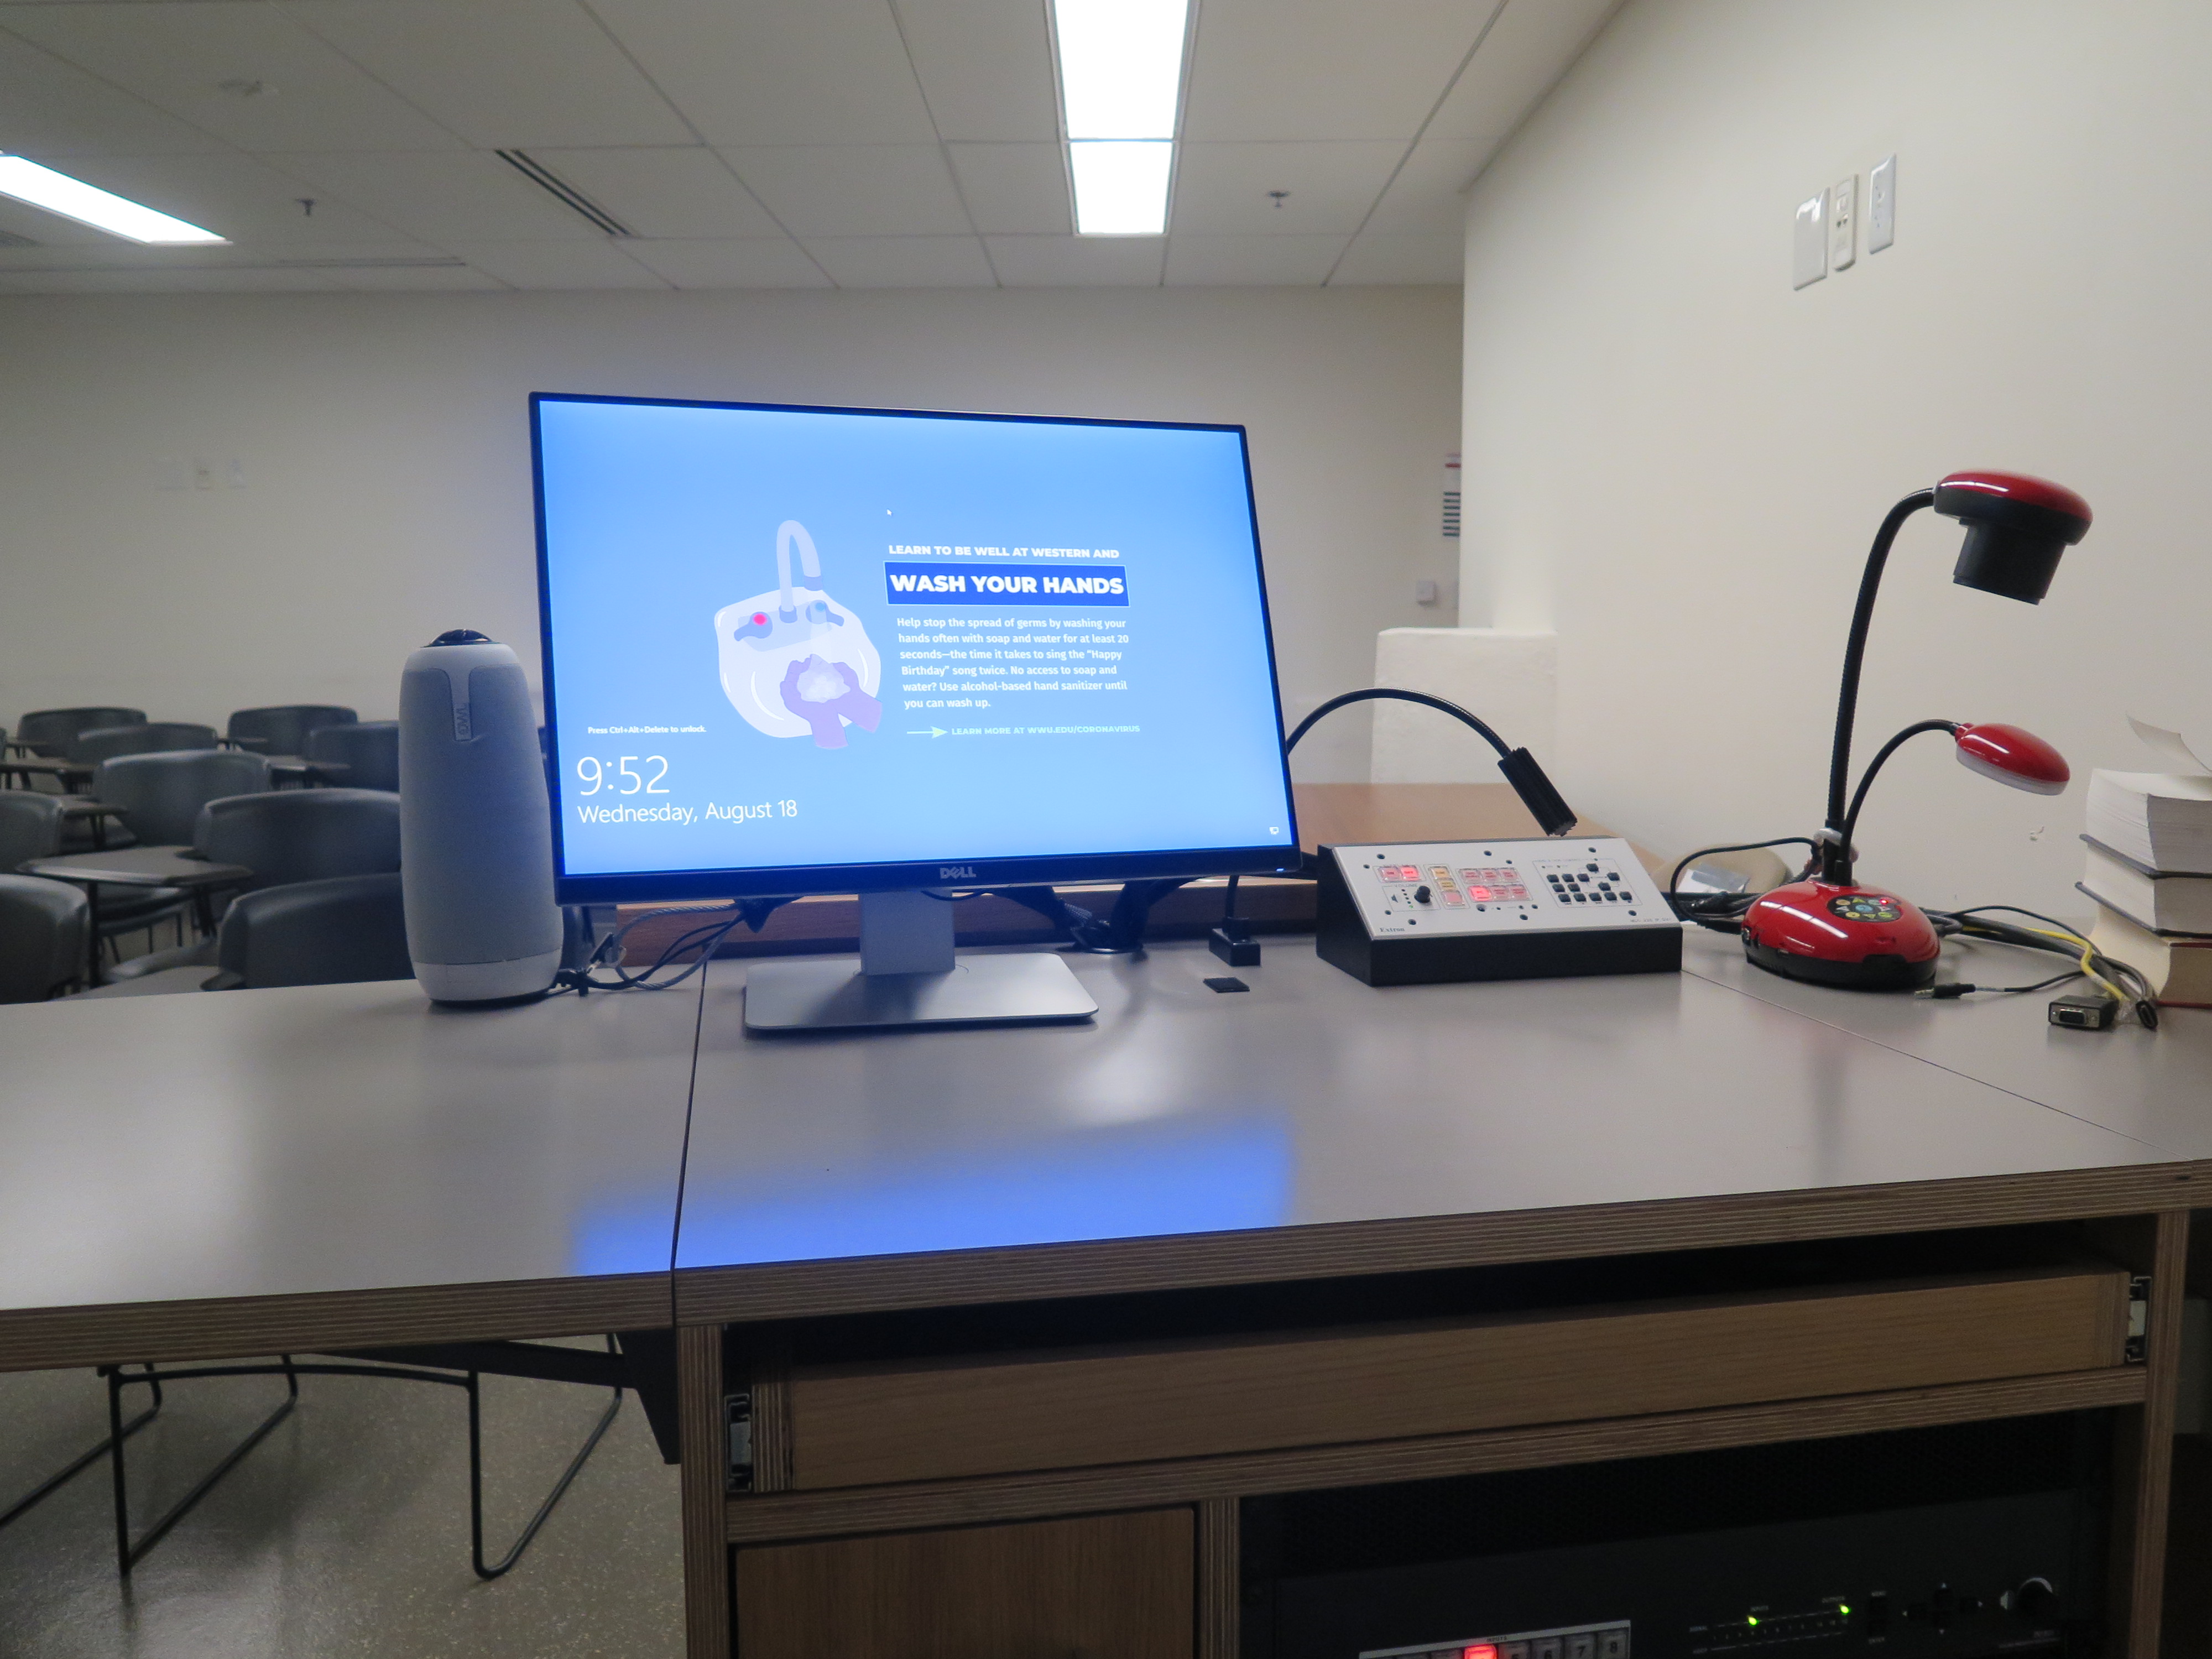 On top of Podium is Owl webcam, Dell Computer Monitor, AV Push Button Controller, and Lumens Ladybug Document Camera.